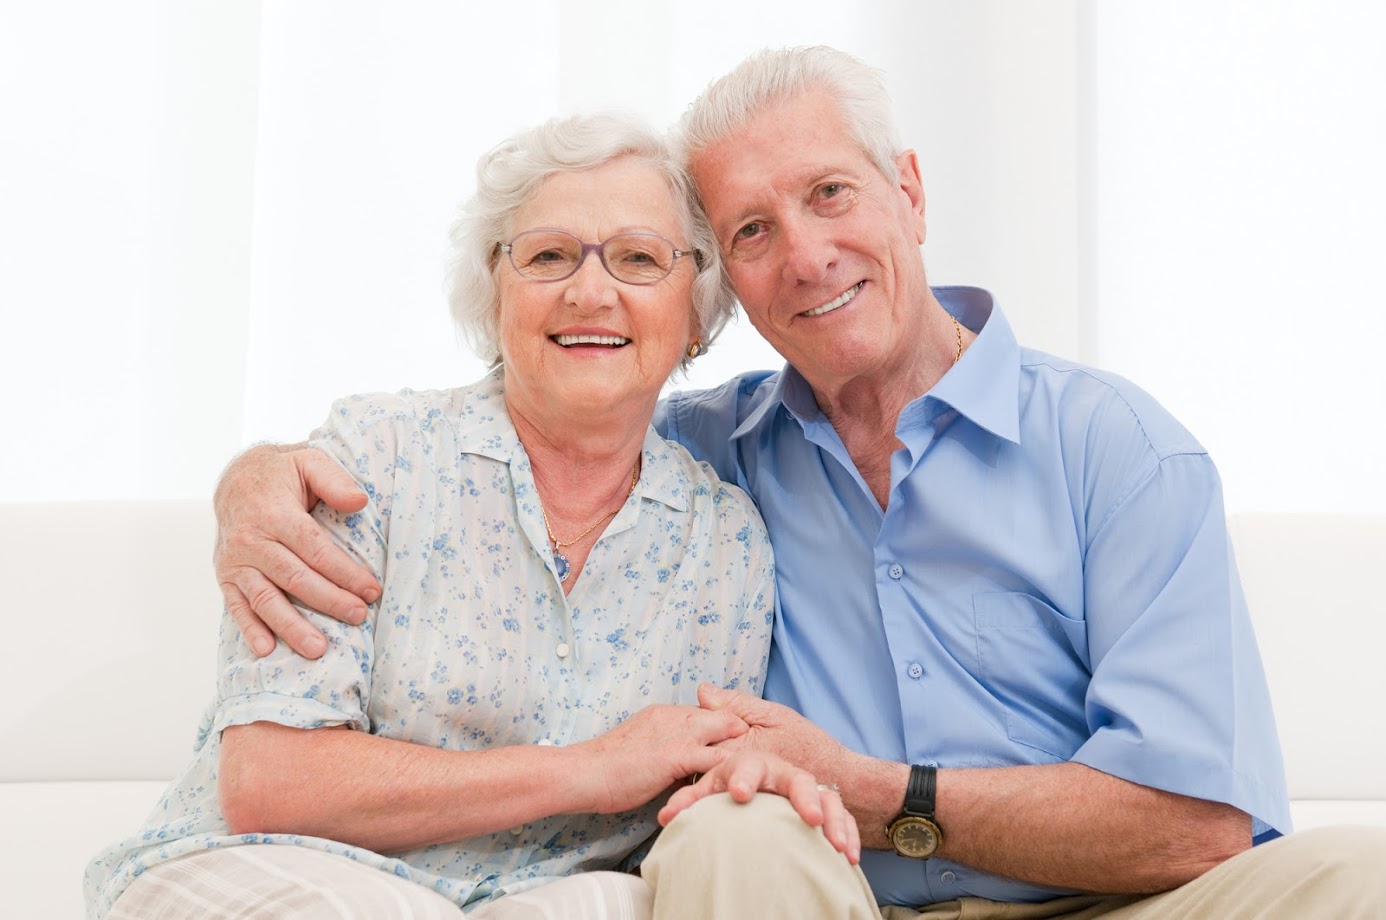 Happy smiling senior couple embracing together at home